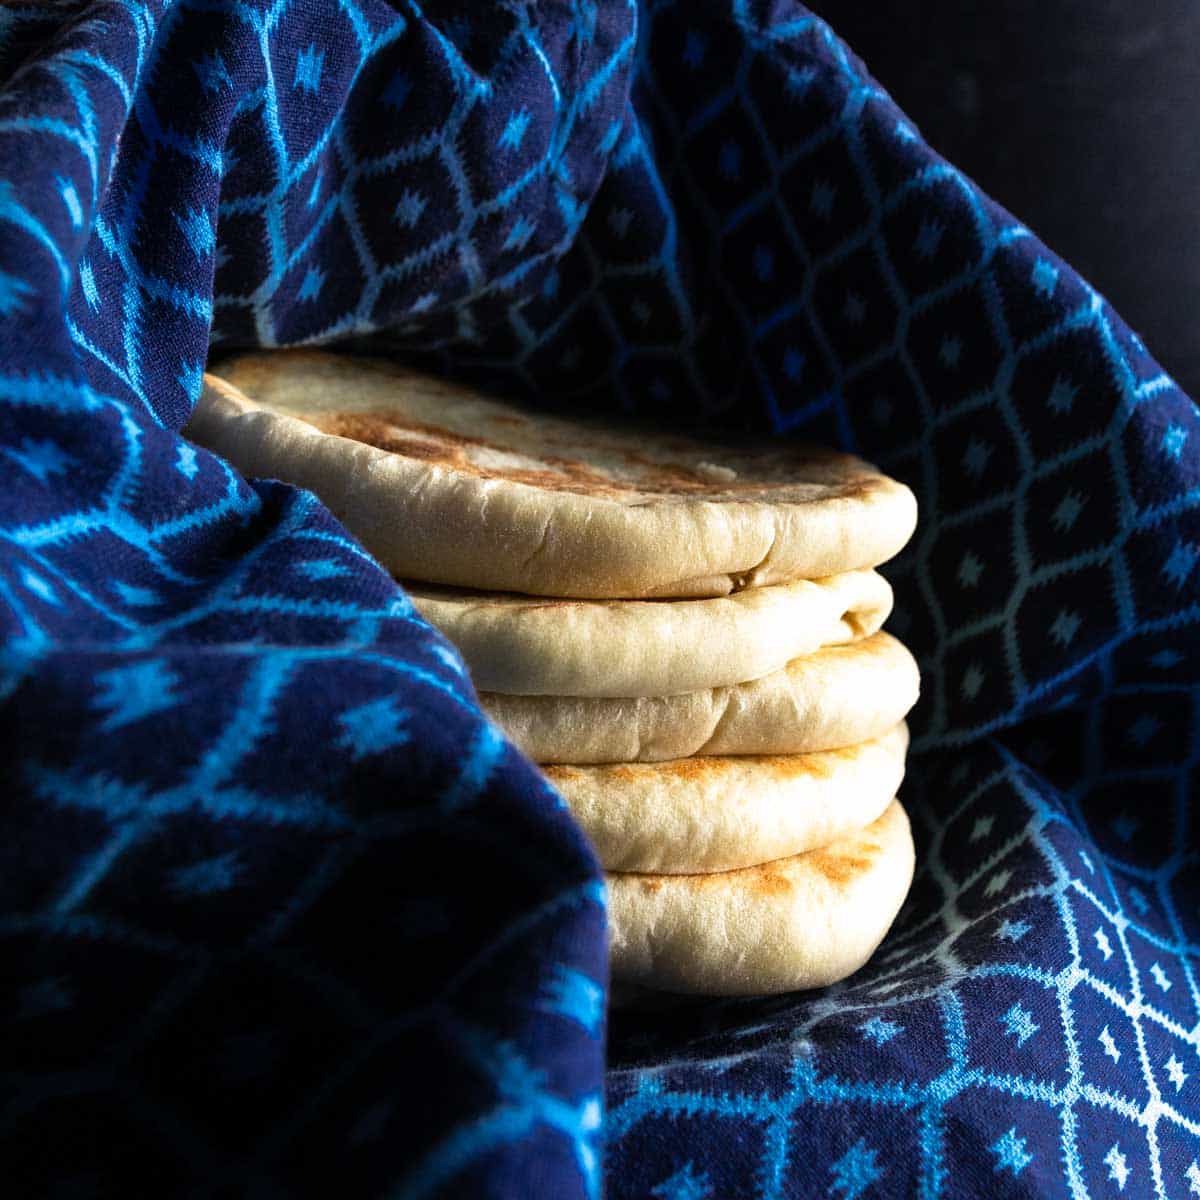 A stack of pita pockets wrapped in a clean dish towel to steam after baking.
